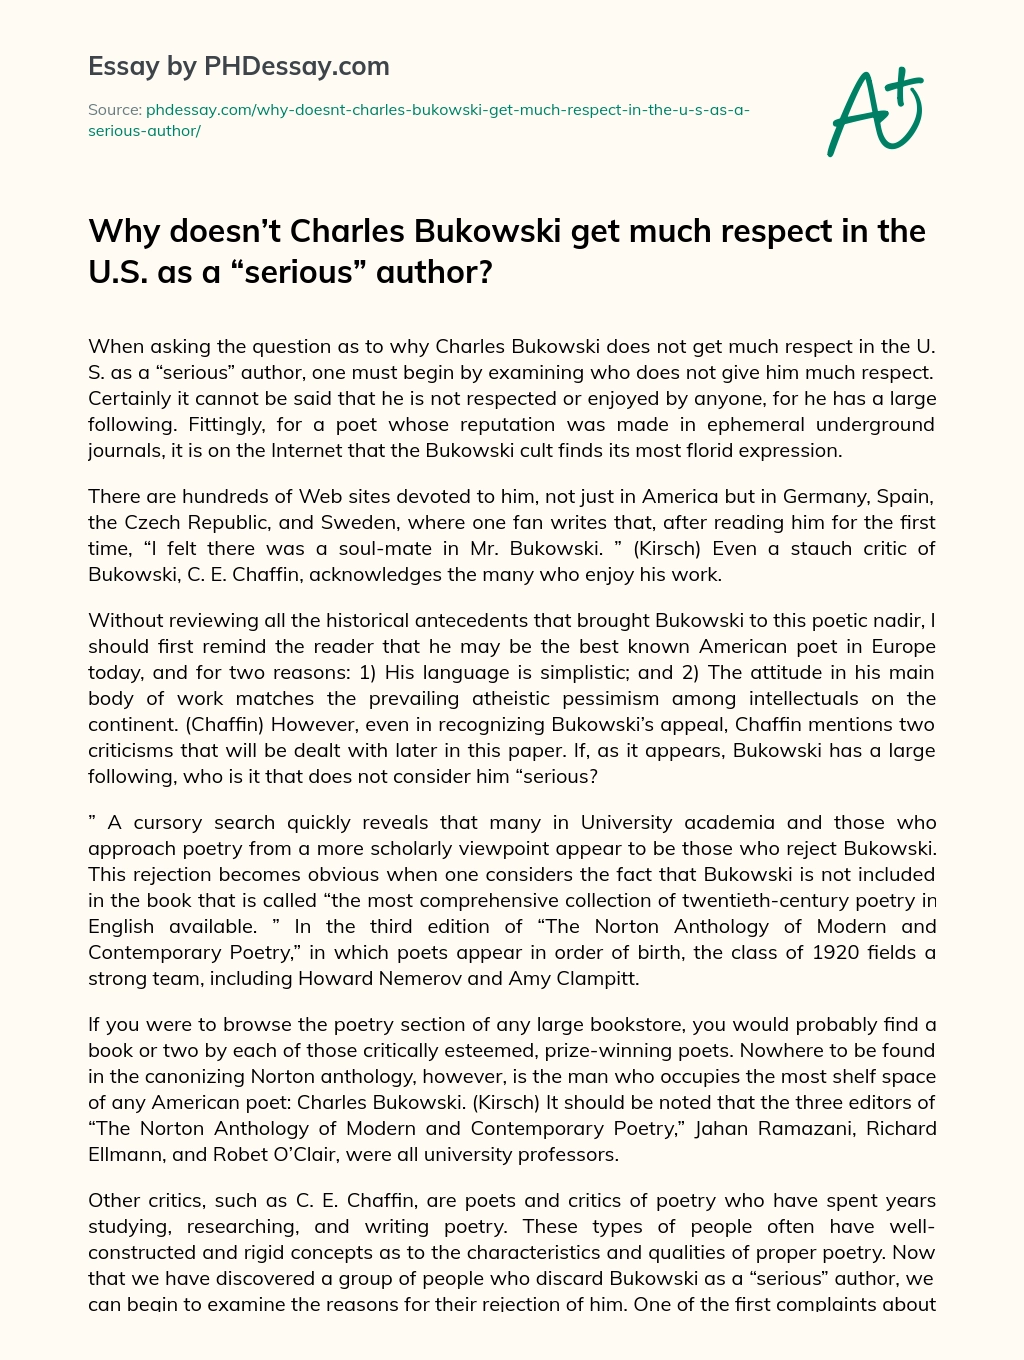 Why doesn’t Charles Bukowski get much respect in the U.S. as a “serious” author? essay